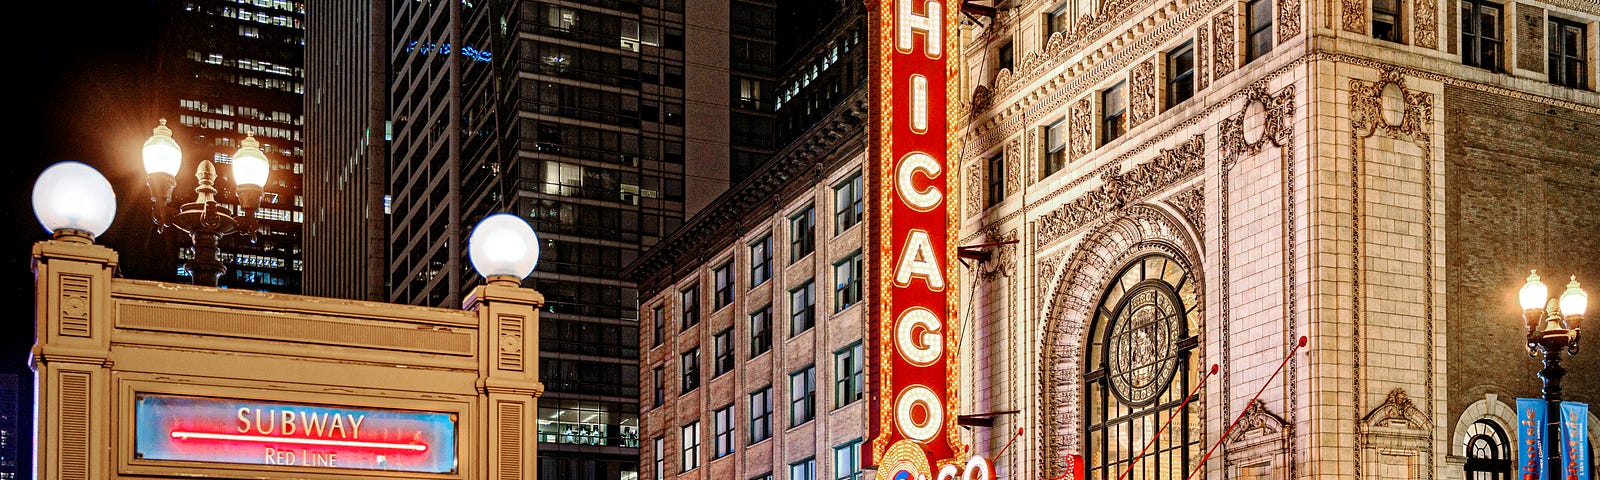 Chicago Theater and subway stop lit up with neon lights at night